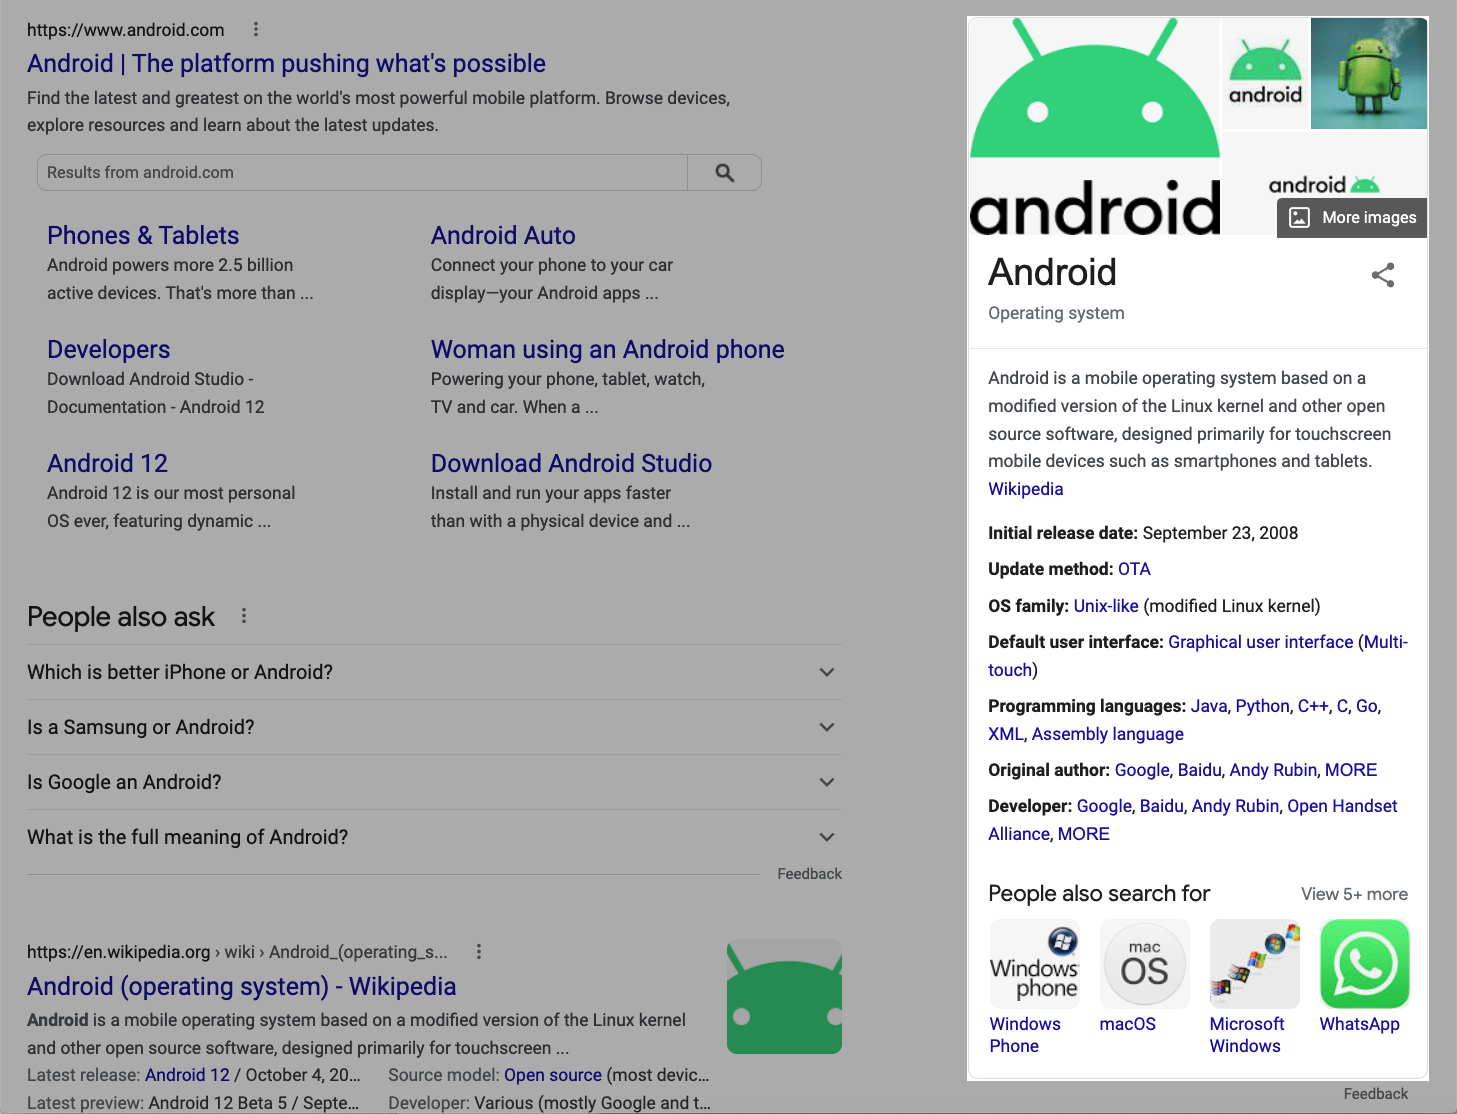 Knowledge Panel about Android